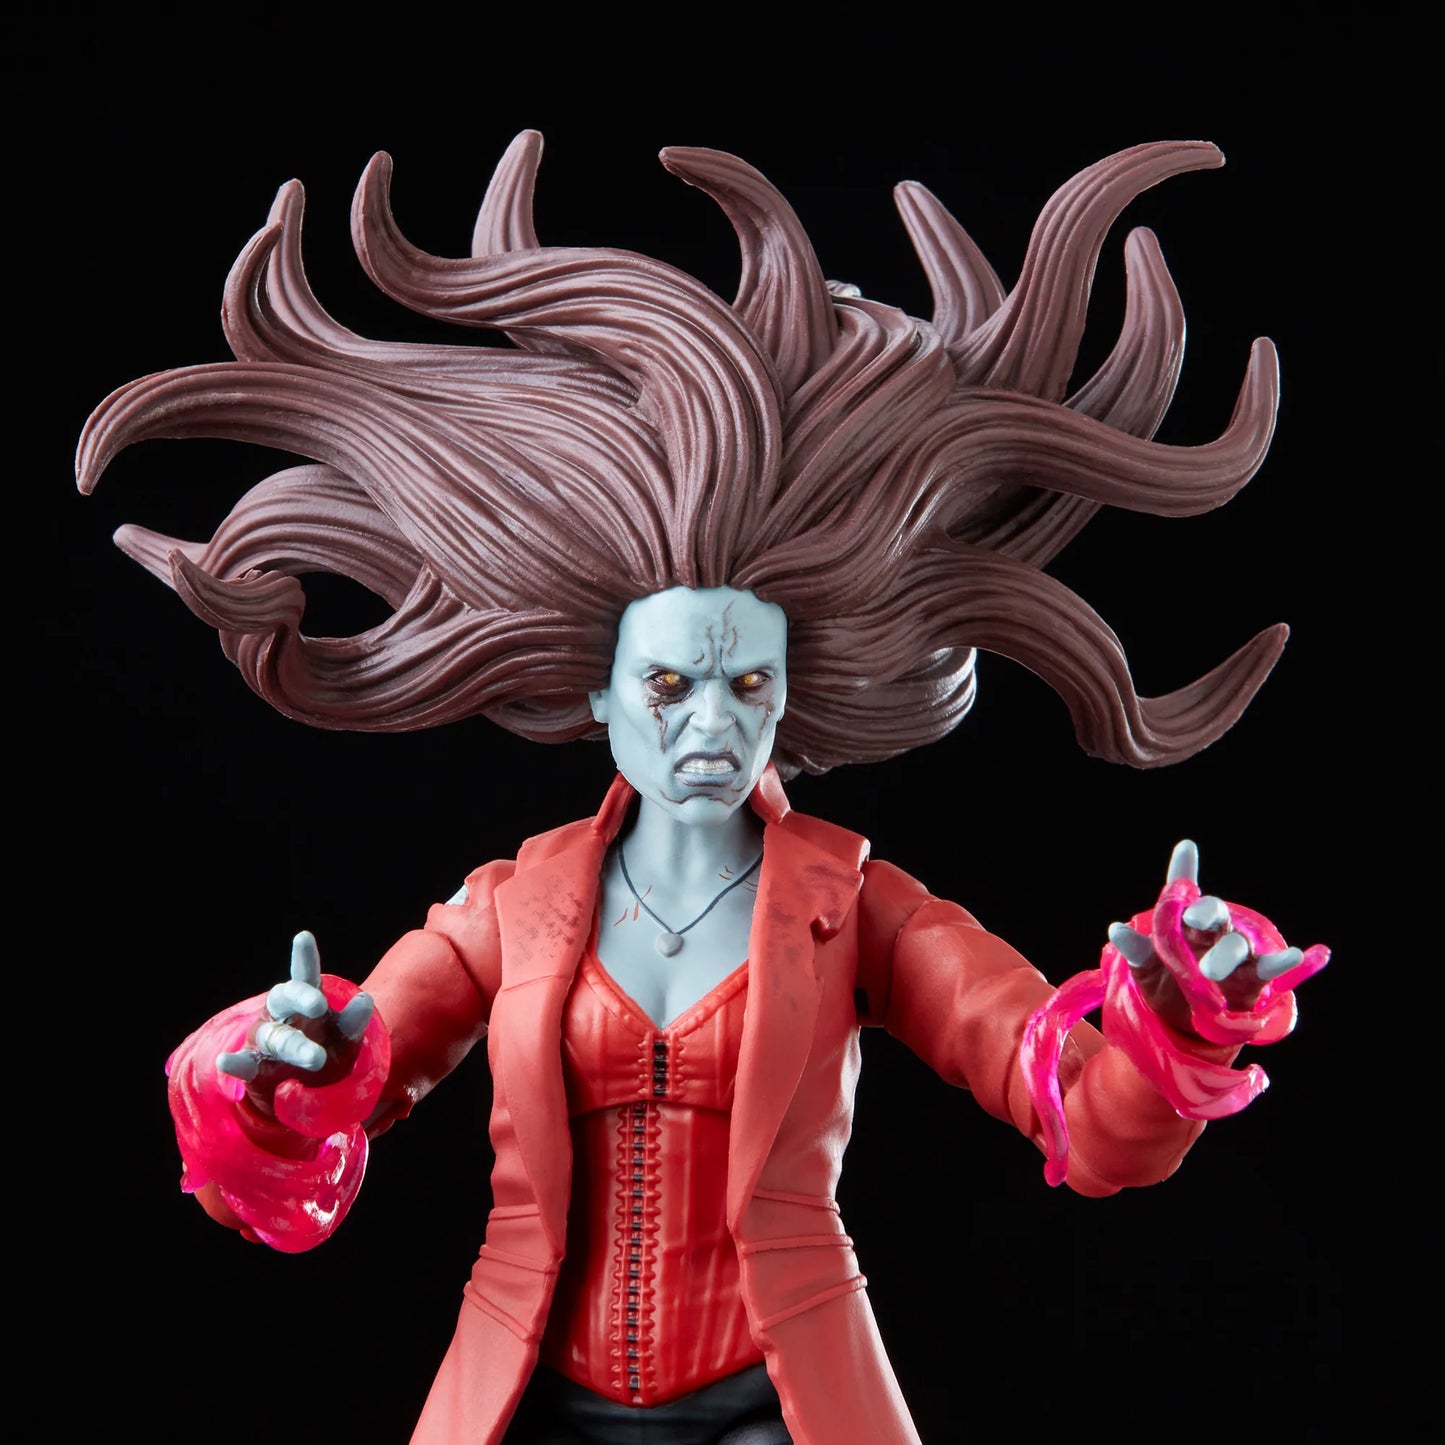 Marvel Legends Series Zombie Scarlet Witch